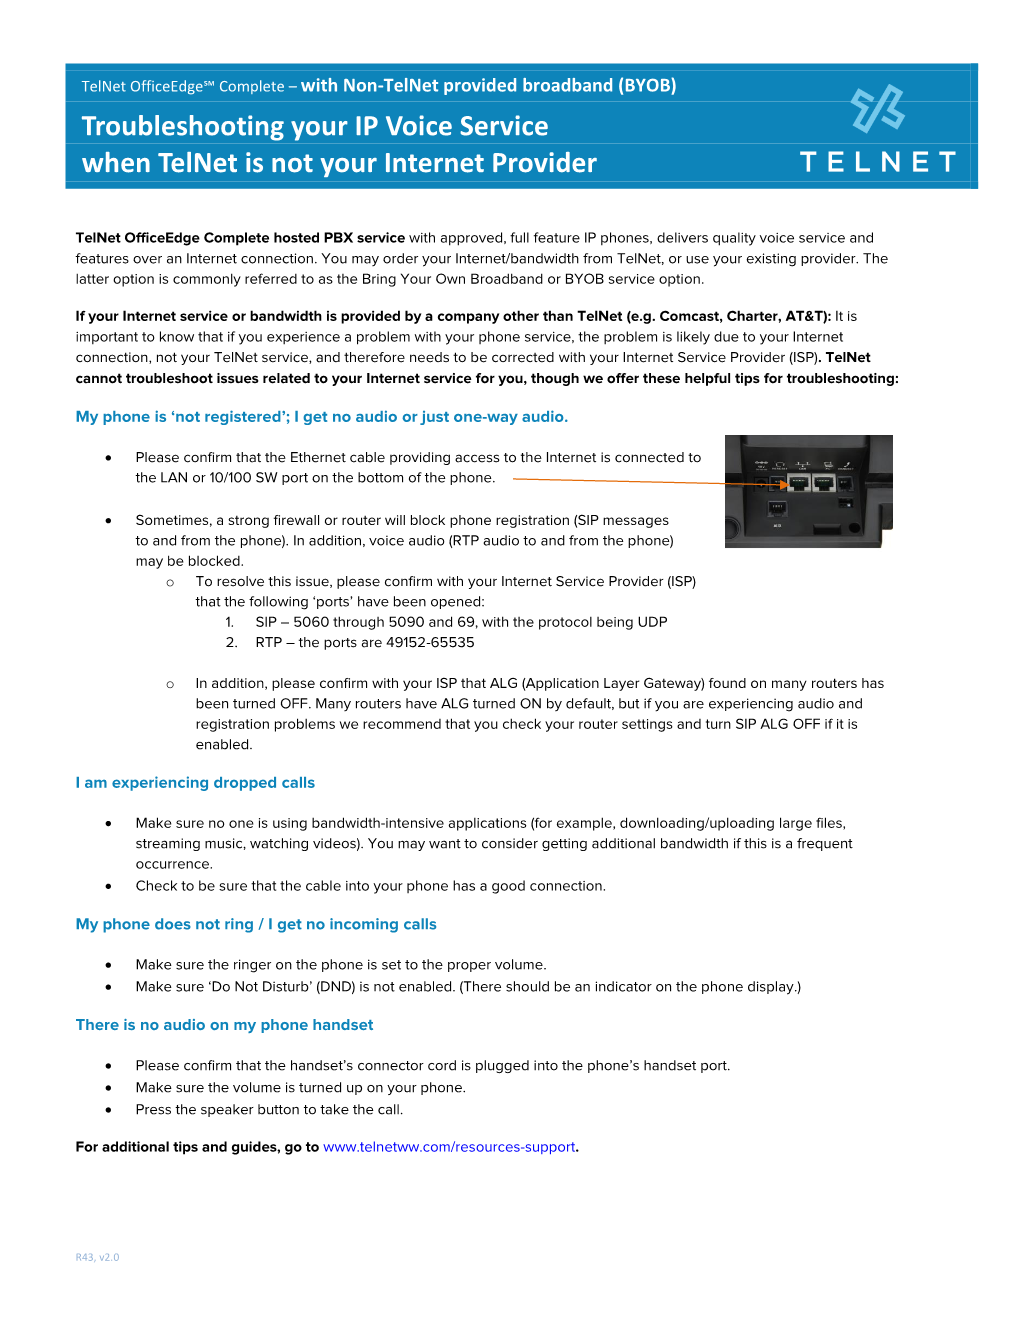 Troubleshooting Your IP Voice Service When Telnet Is Not Your Internet Provider